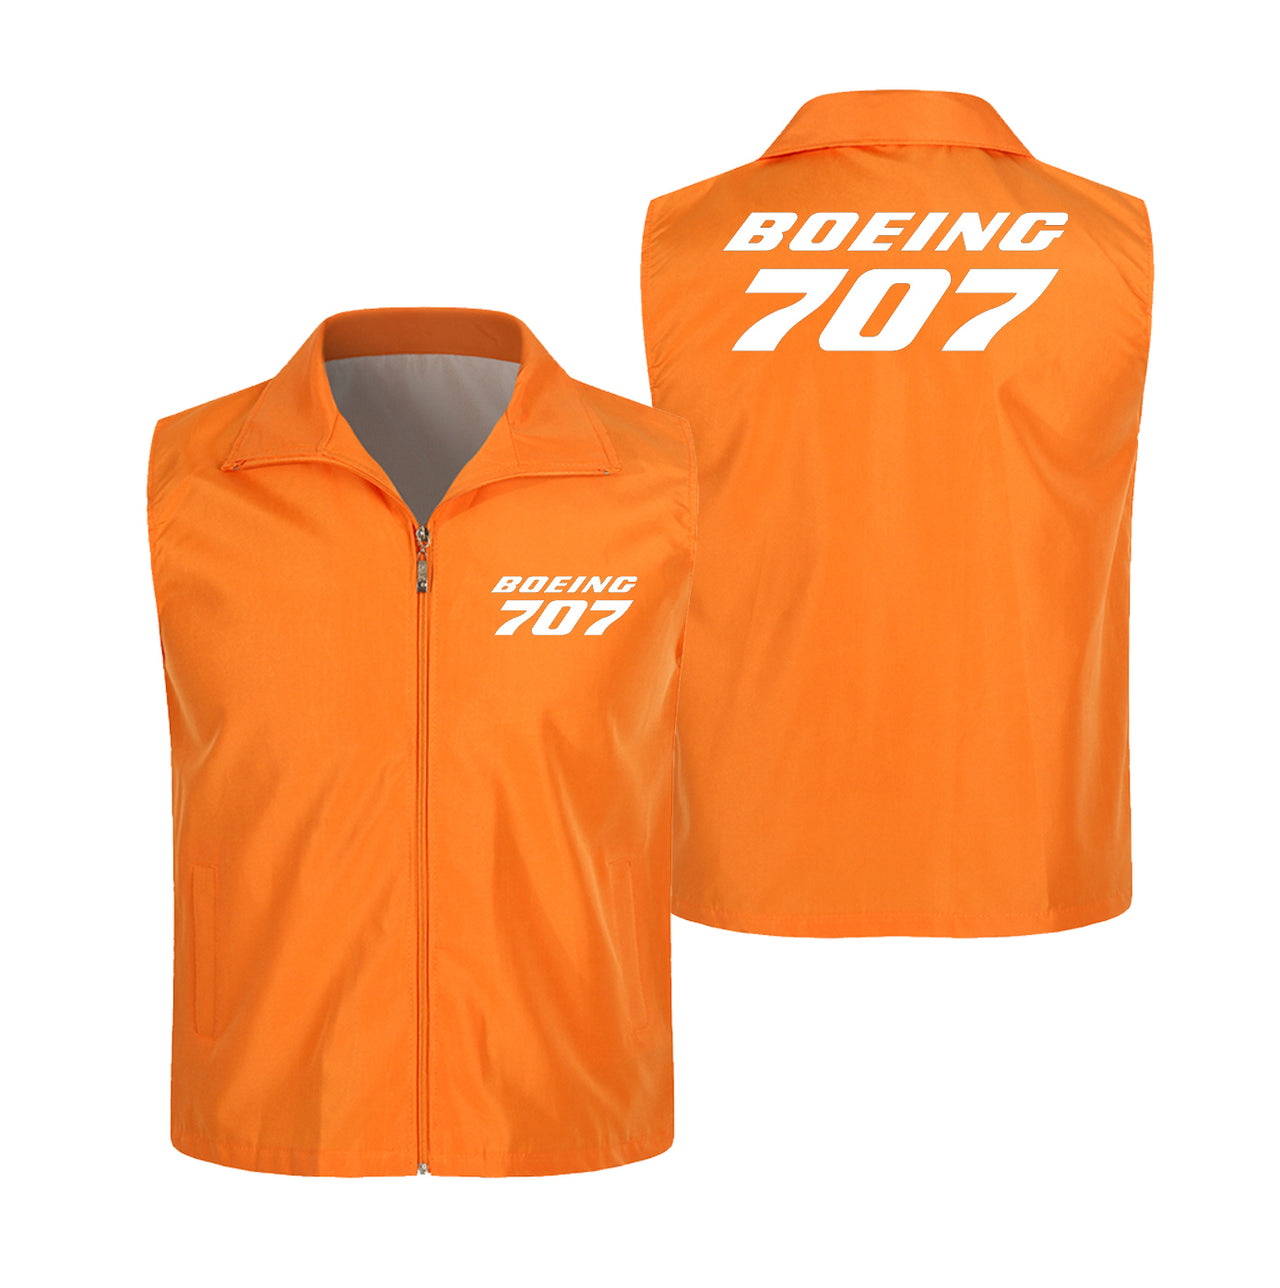 Boeing 707 & Text Designed Thin Style Vests